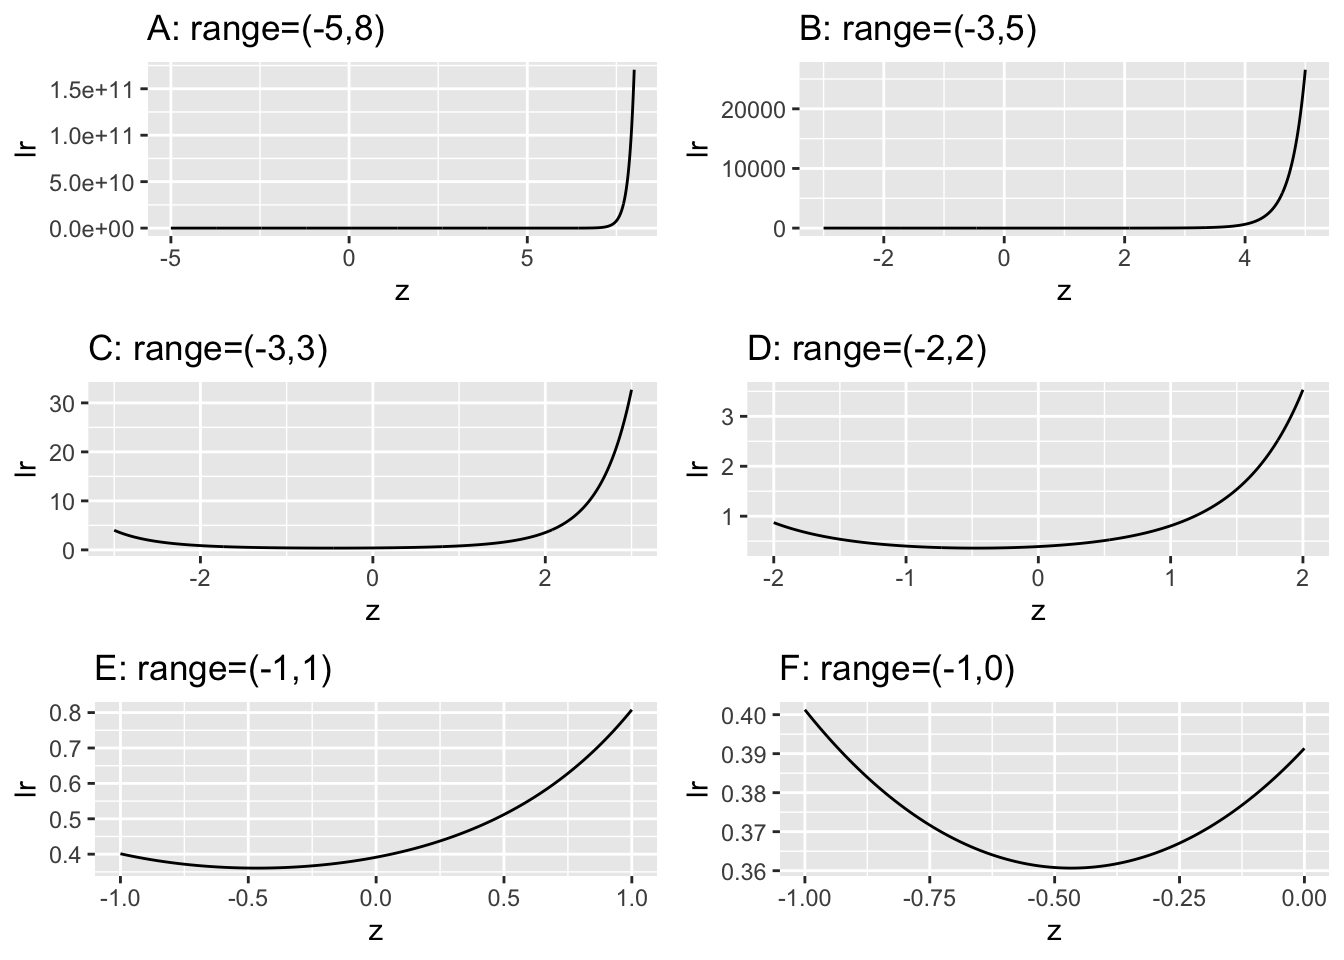 These plots of likelihood ratio $\text{lr}$ of the ROC curves as functions of z for $a = 0.7, b = 0.5$. They correspond to different ranges along the z-axis, starting with a 'birds-eye' view (panel A) and gradually focusing in on the region near the minimum (panel F). 